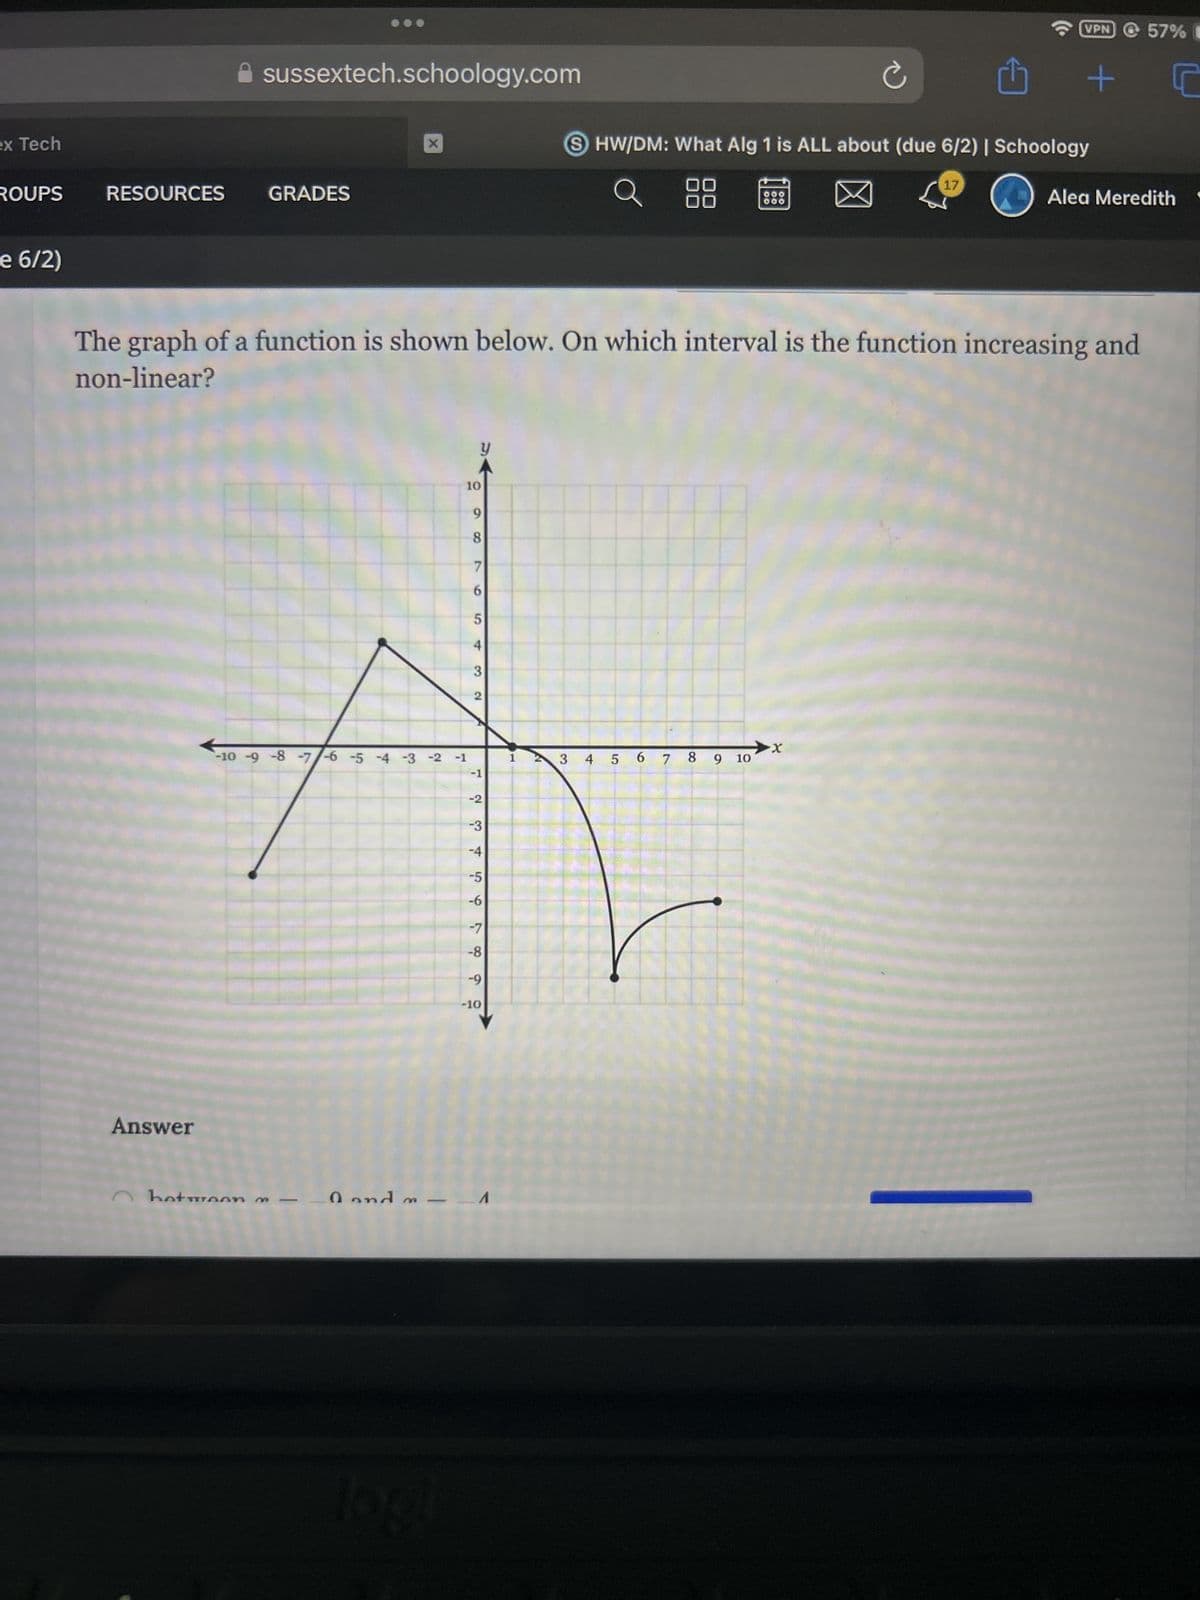 sussextech.schoology.com
ex Tech
ROUPS
RESOURCES
GRADES
e 6/2)
X
VPN 57% C
+
SHW/DM: What Alg 1 is ALL about (due 6/2) | Schoology
88
000
17
Alea Meredith "
The graph of a function is shown below. On which interval is the function increasing and
non-linear?
y
110
6
8
7
19
6
5
сл
4
-10 -9 -8 -7 -6 -5 -4 -3 -2 -1
Answer
between
0 and
3
2
-1
-2
-3
-4
-5
756
-6
-7
-8
-9
-10
logl
N
x
3 4 5 6 7 8 9 10